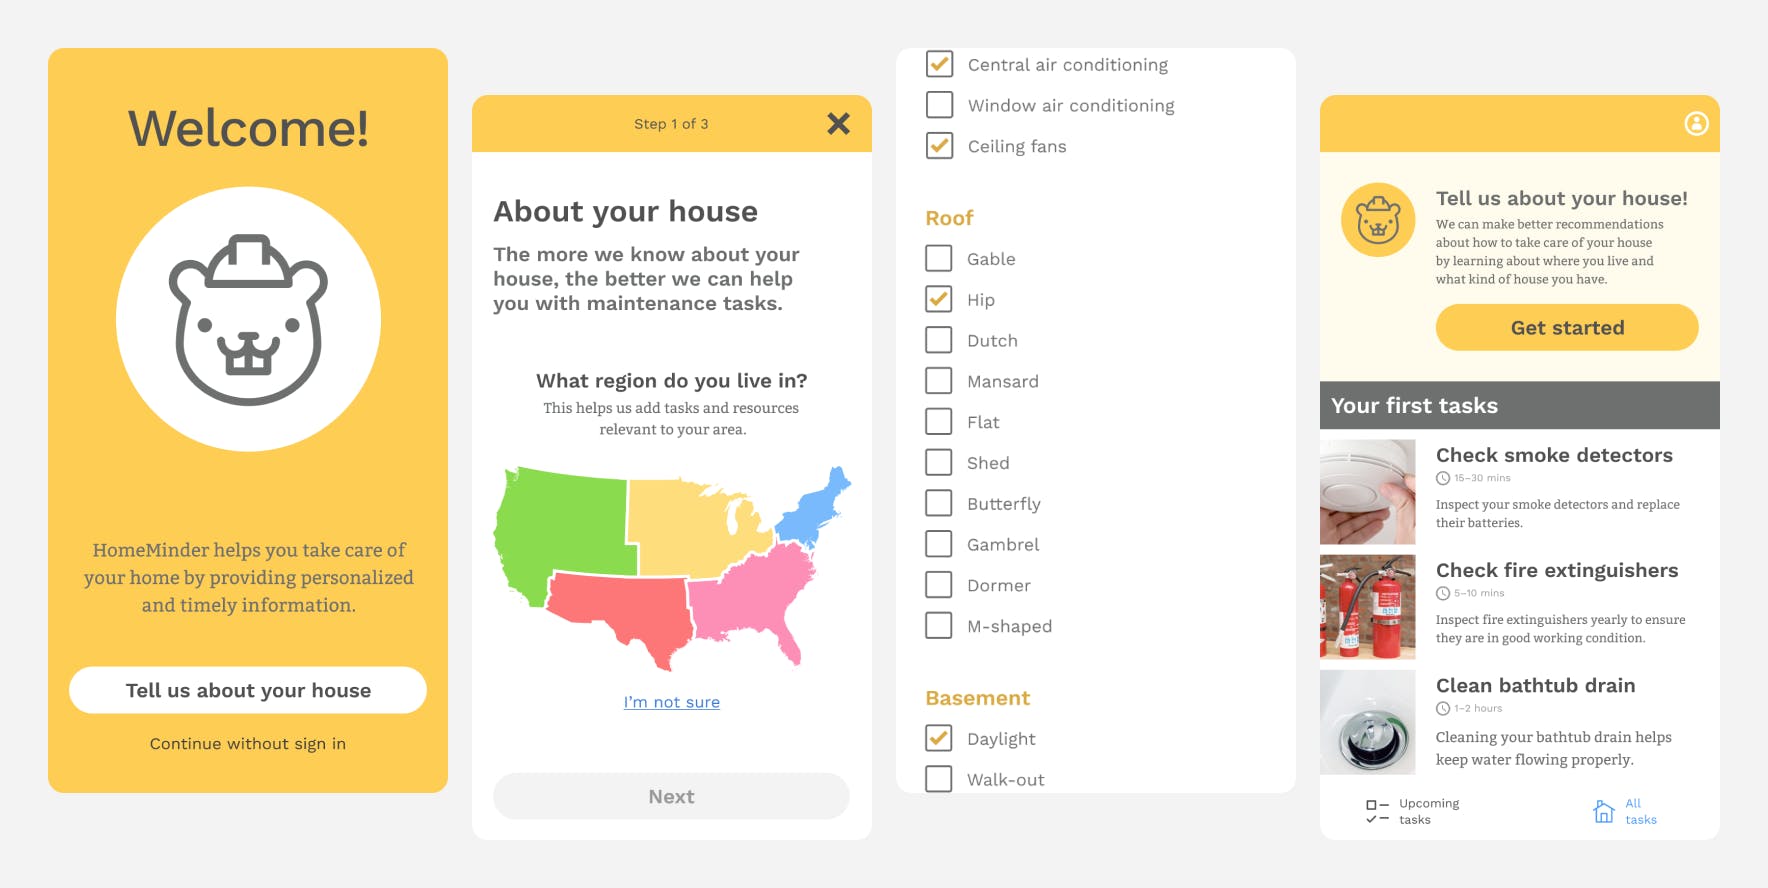 Four screens from the app prototype; a welcome screen, part of a form asking what region of the US you live in, a checklist of house amenities,a list of tasks about your house